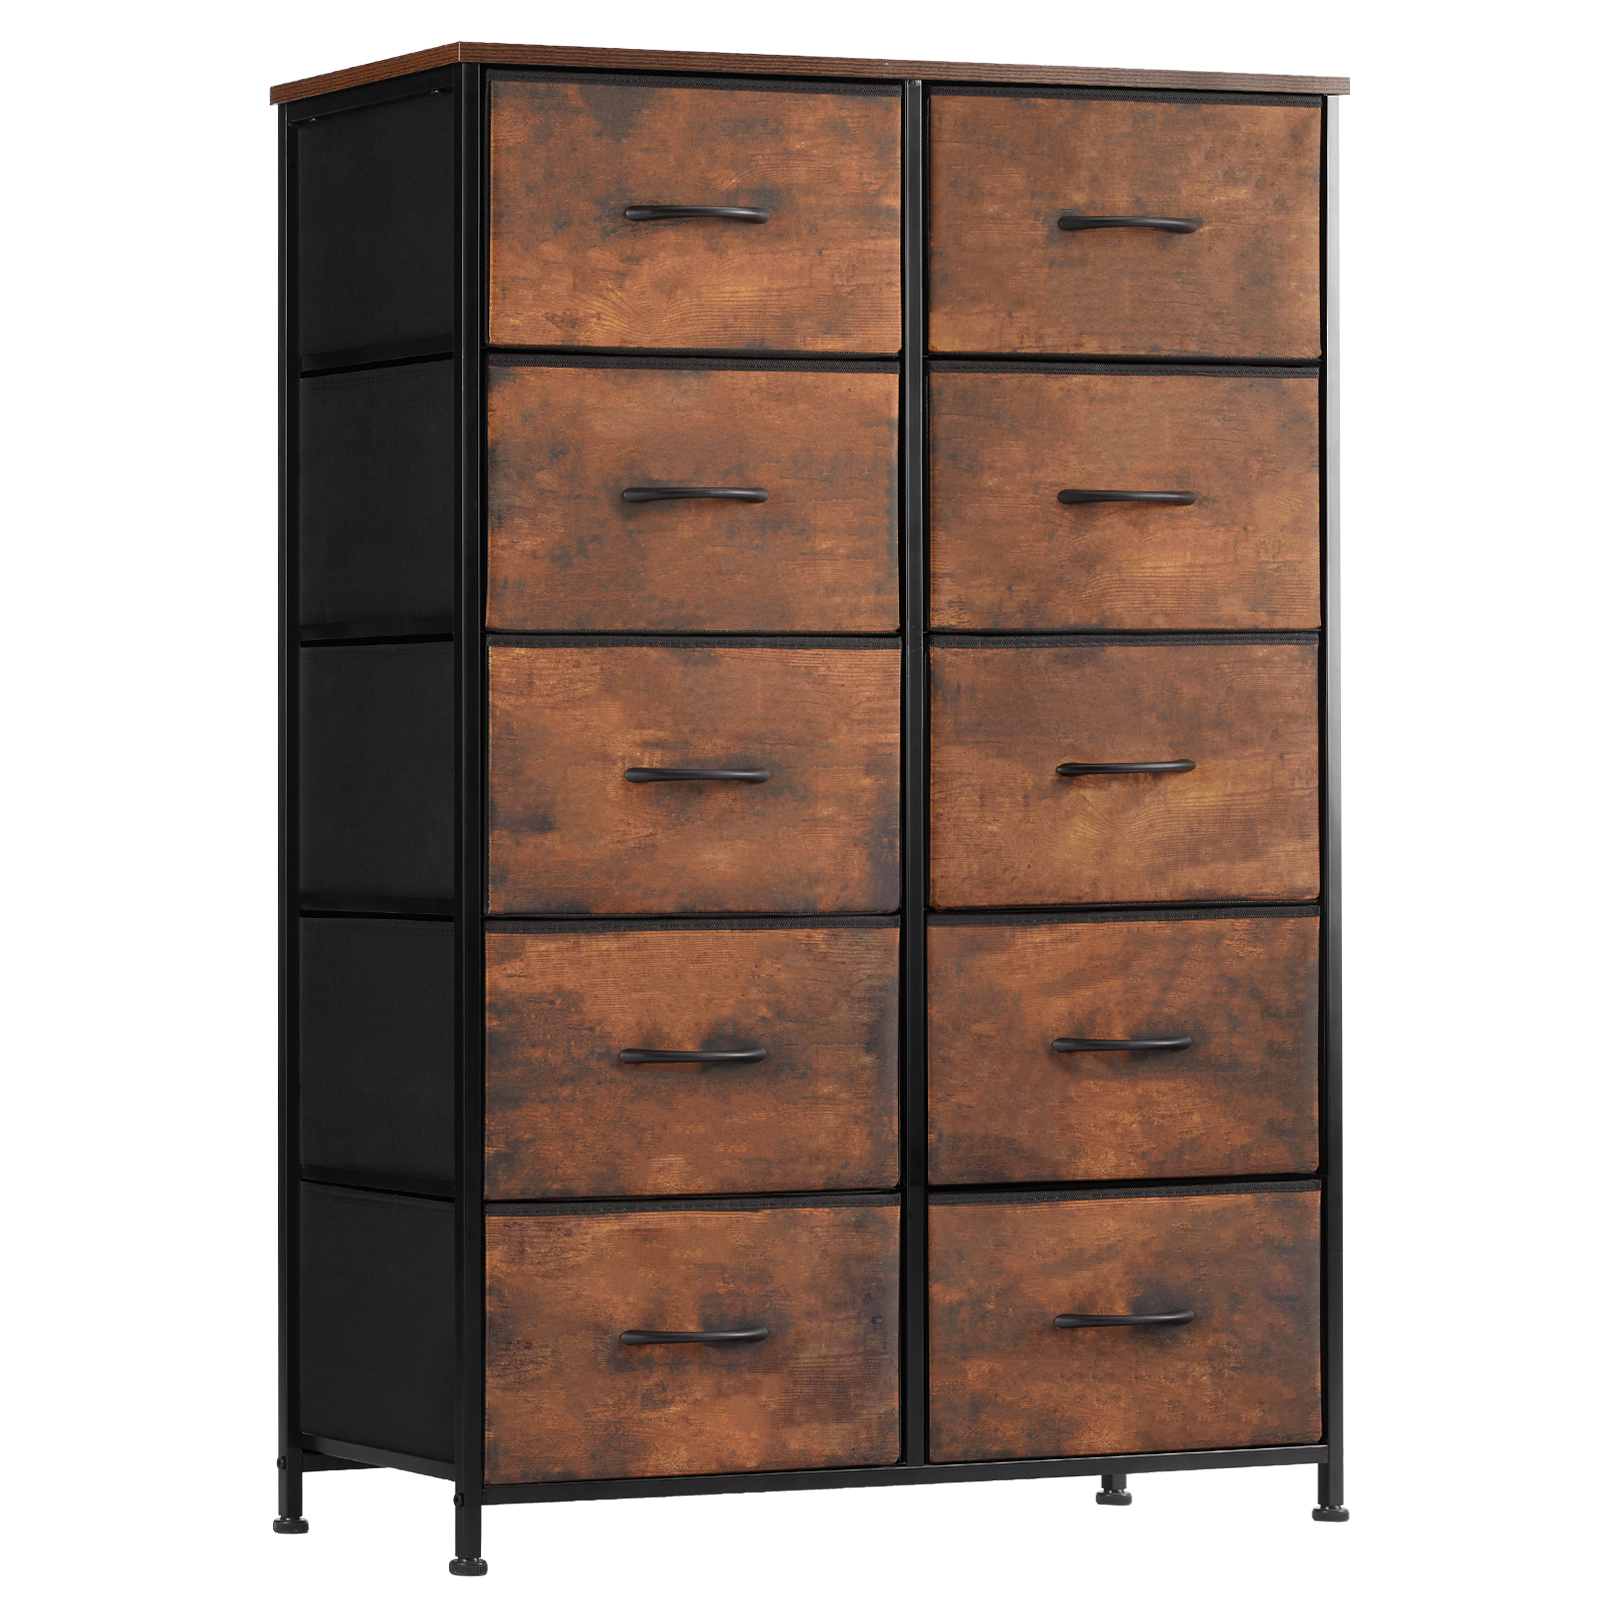 

10 Fabric Drawers Dresser, Storage Chest Organizer Units Bins, Dresser & Chest Of Drawers, Storage Tower With Fabric Cabinet, Metal Frame Portable Furniture For Livingroom, Bedroom, Lab